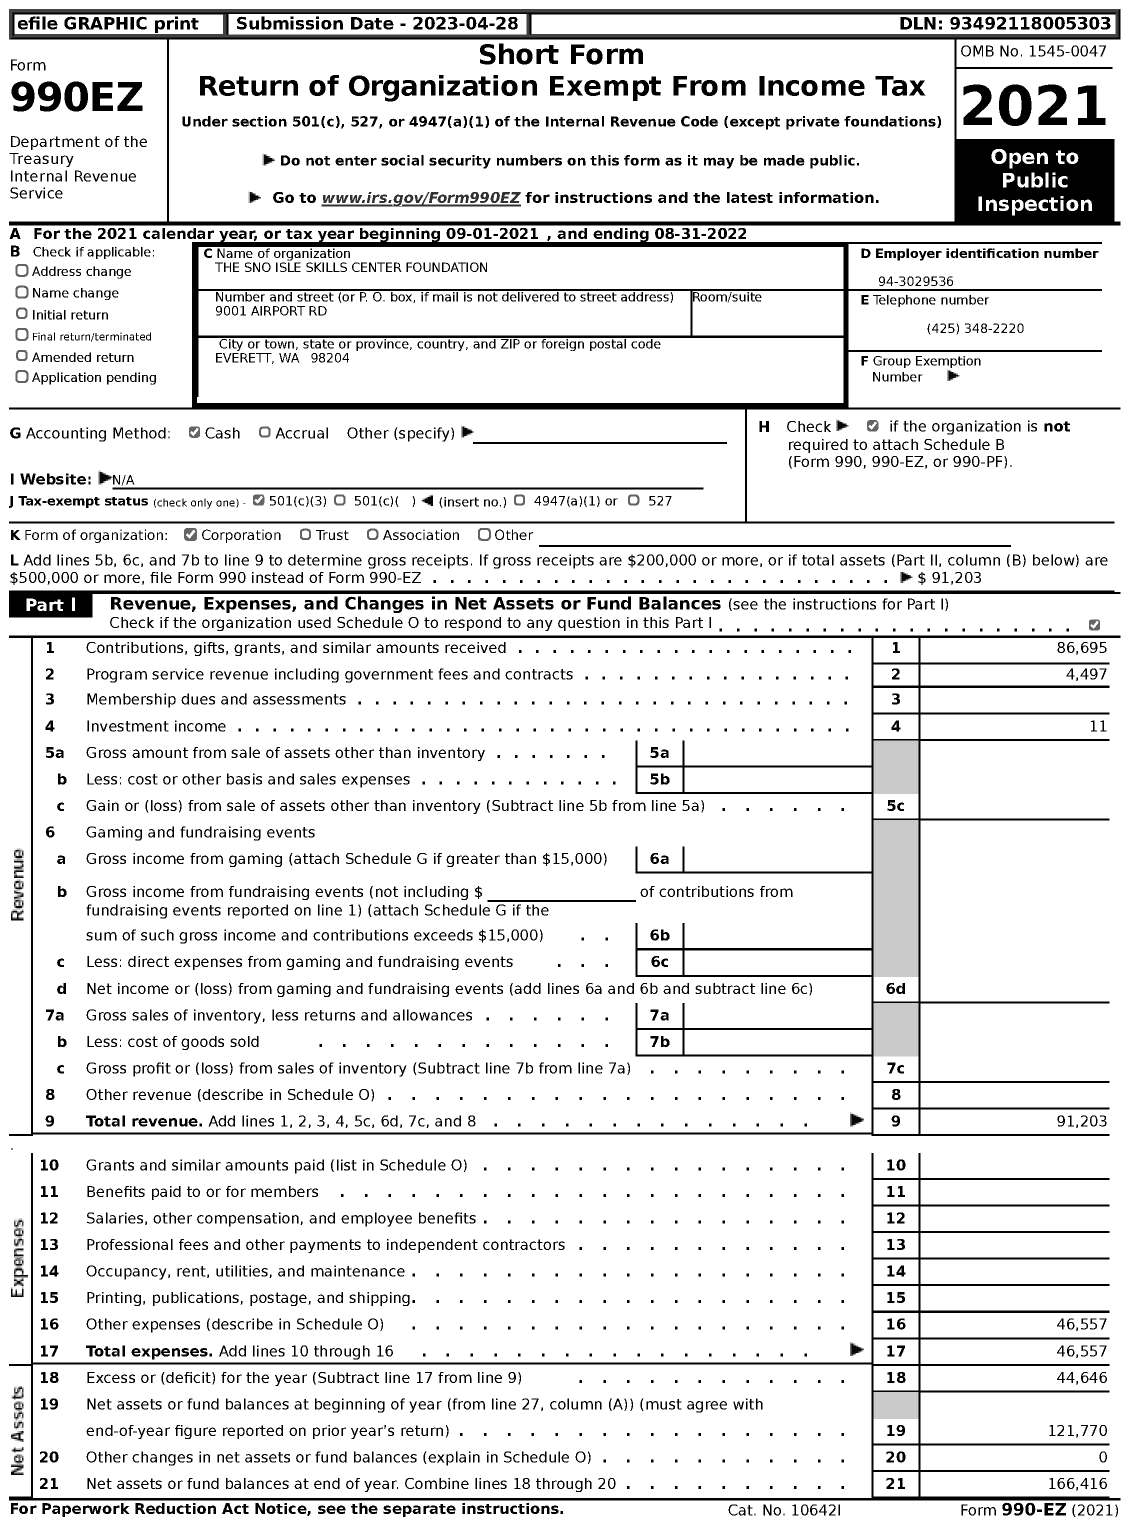 Image of first page of 2021 Form 990EZ for The Sno Isle Skills Center Foundation